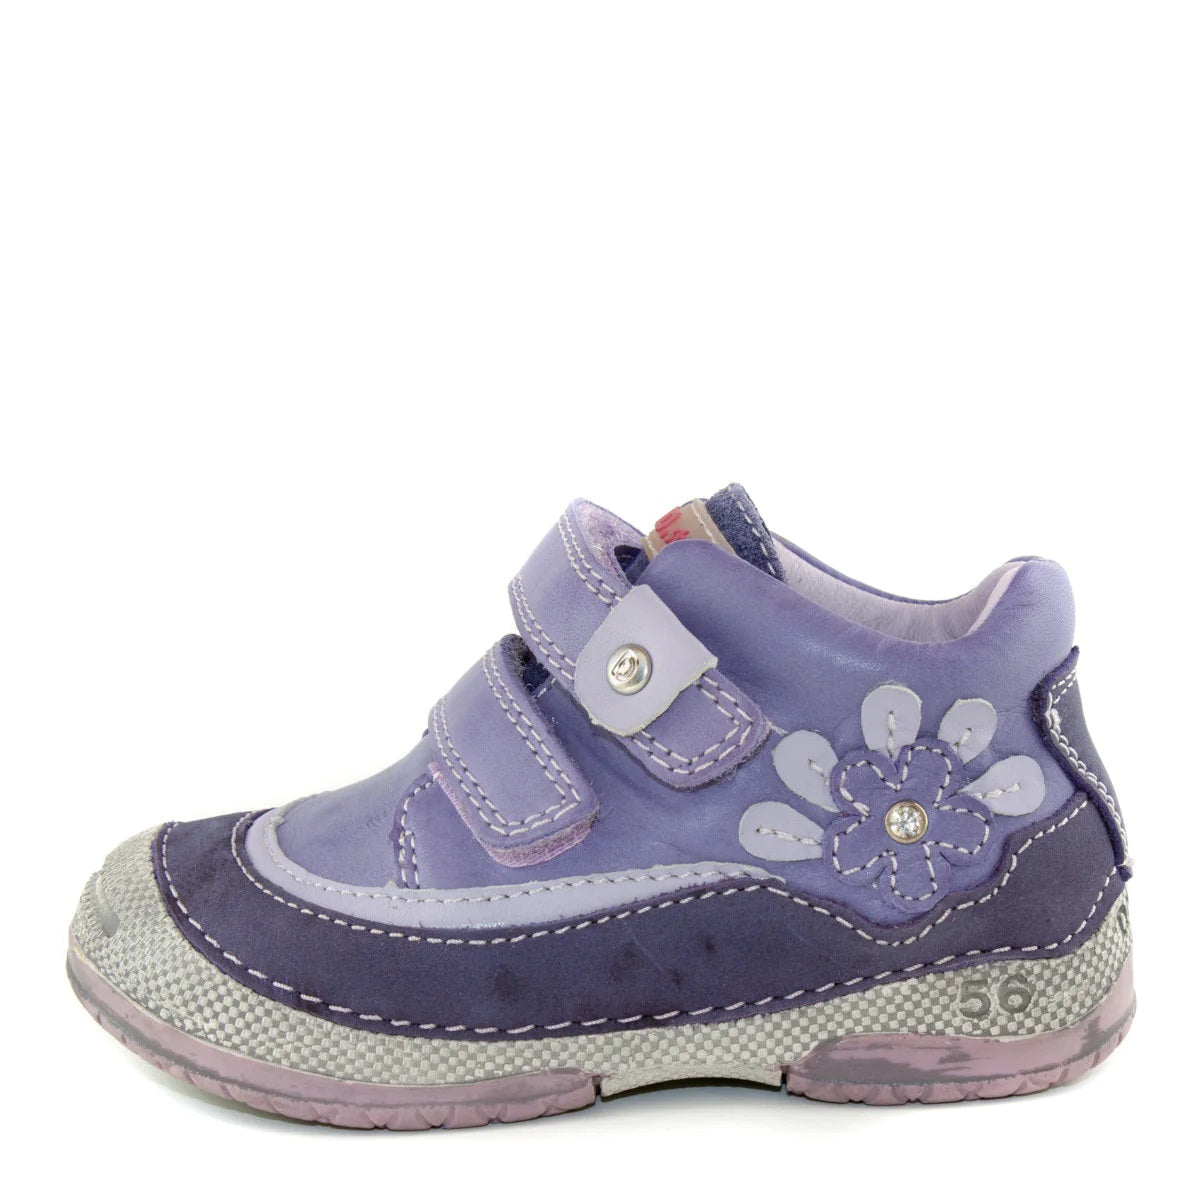 Premium quality first walker with genuine leather lining and upper in violet with flower. Thanks to its high level of specialization, D.D. Step knows exactly what your child’s feet need, to develop properly in the various phases of growth. The exceptional comfort these shoes provide assure the well-being and happiness of your child.